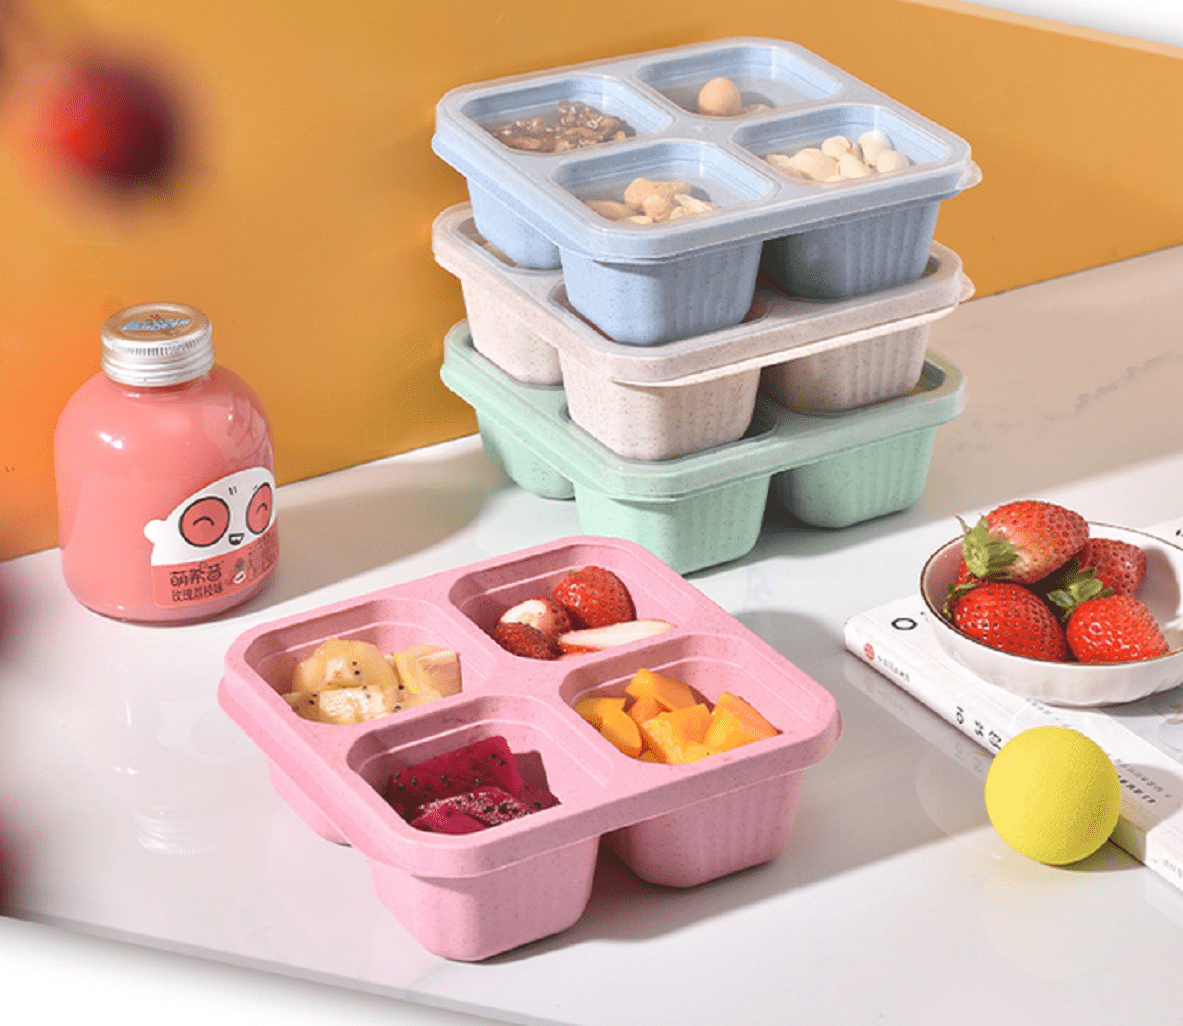  DESLON 6 Pack Snack Containers for Adults Kids, 4 Compartment  Bento Snack Box, Reusable Meal Prep Lunch Containers with Compartment, Divided  Small Snack Containers Bento Box for Travel Work: Home 